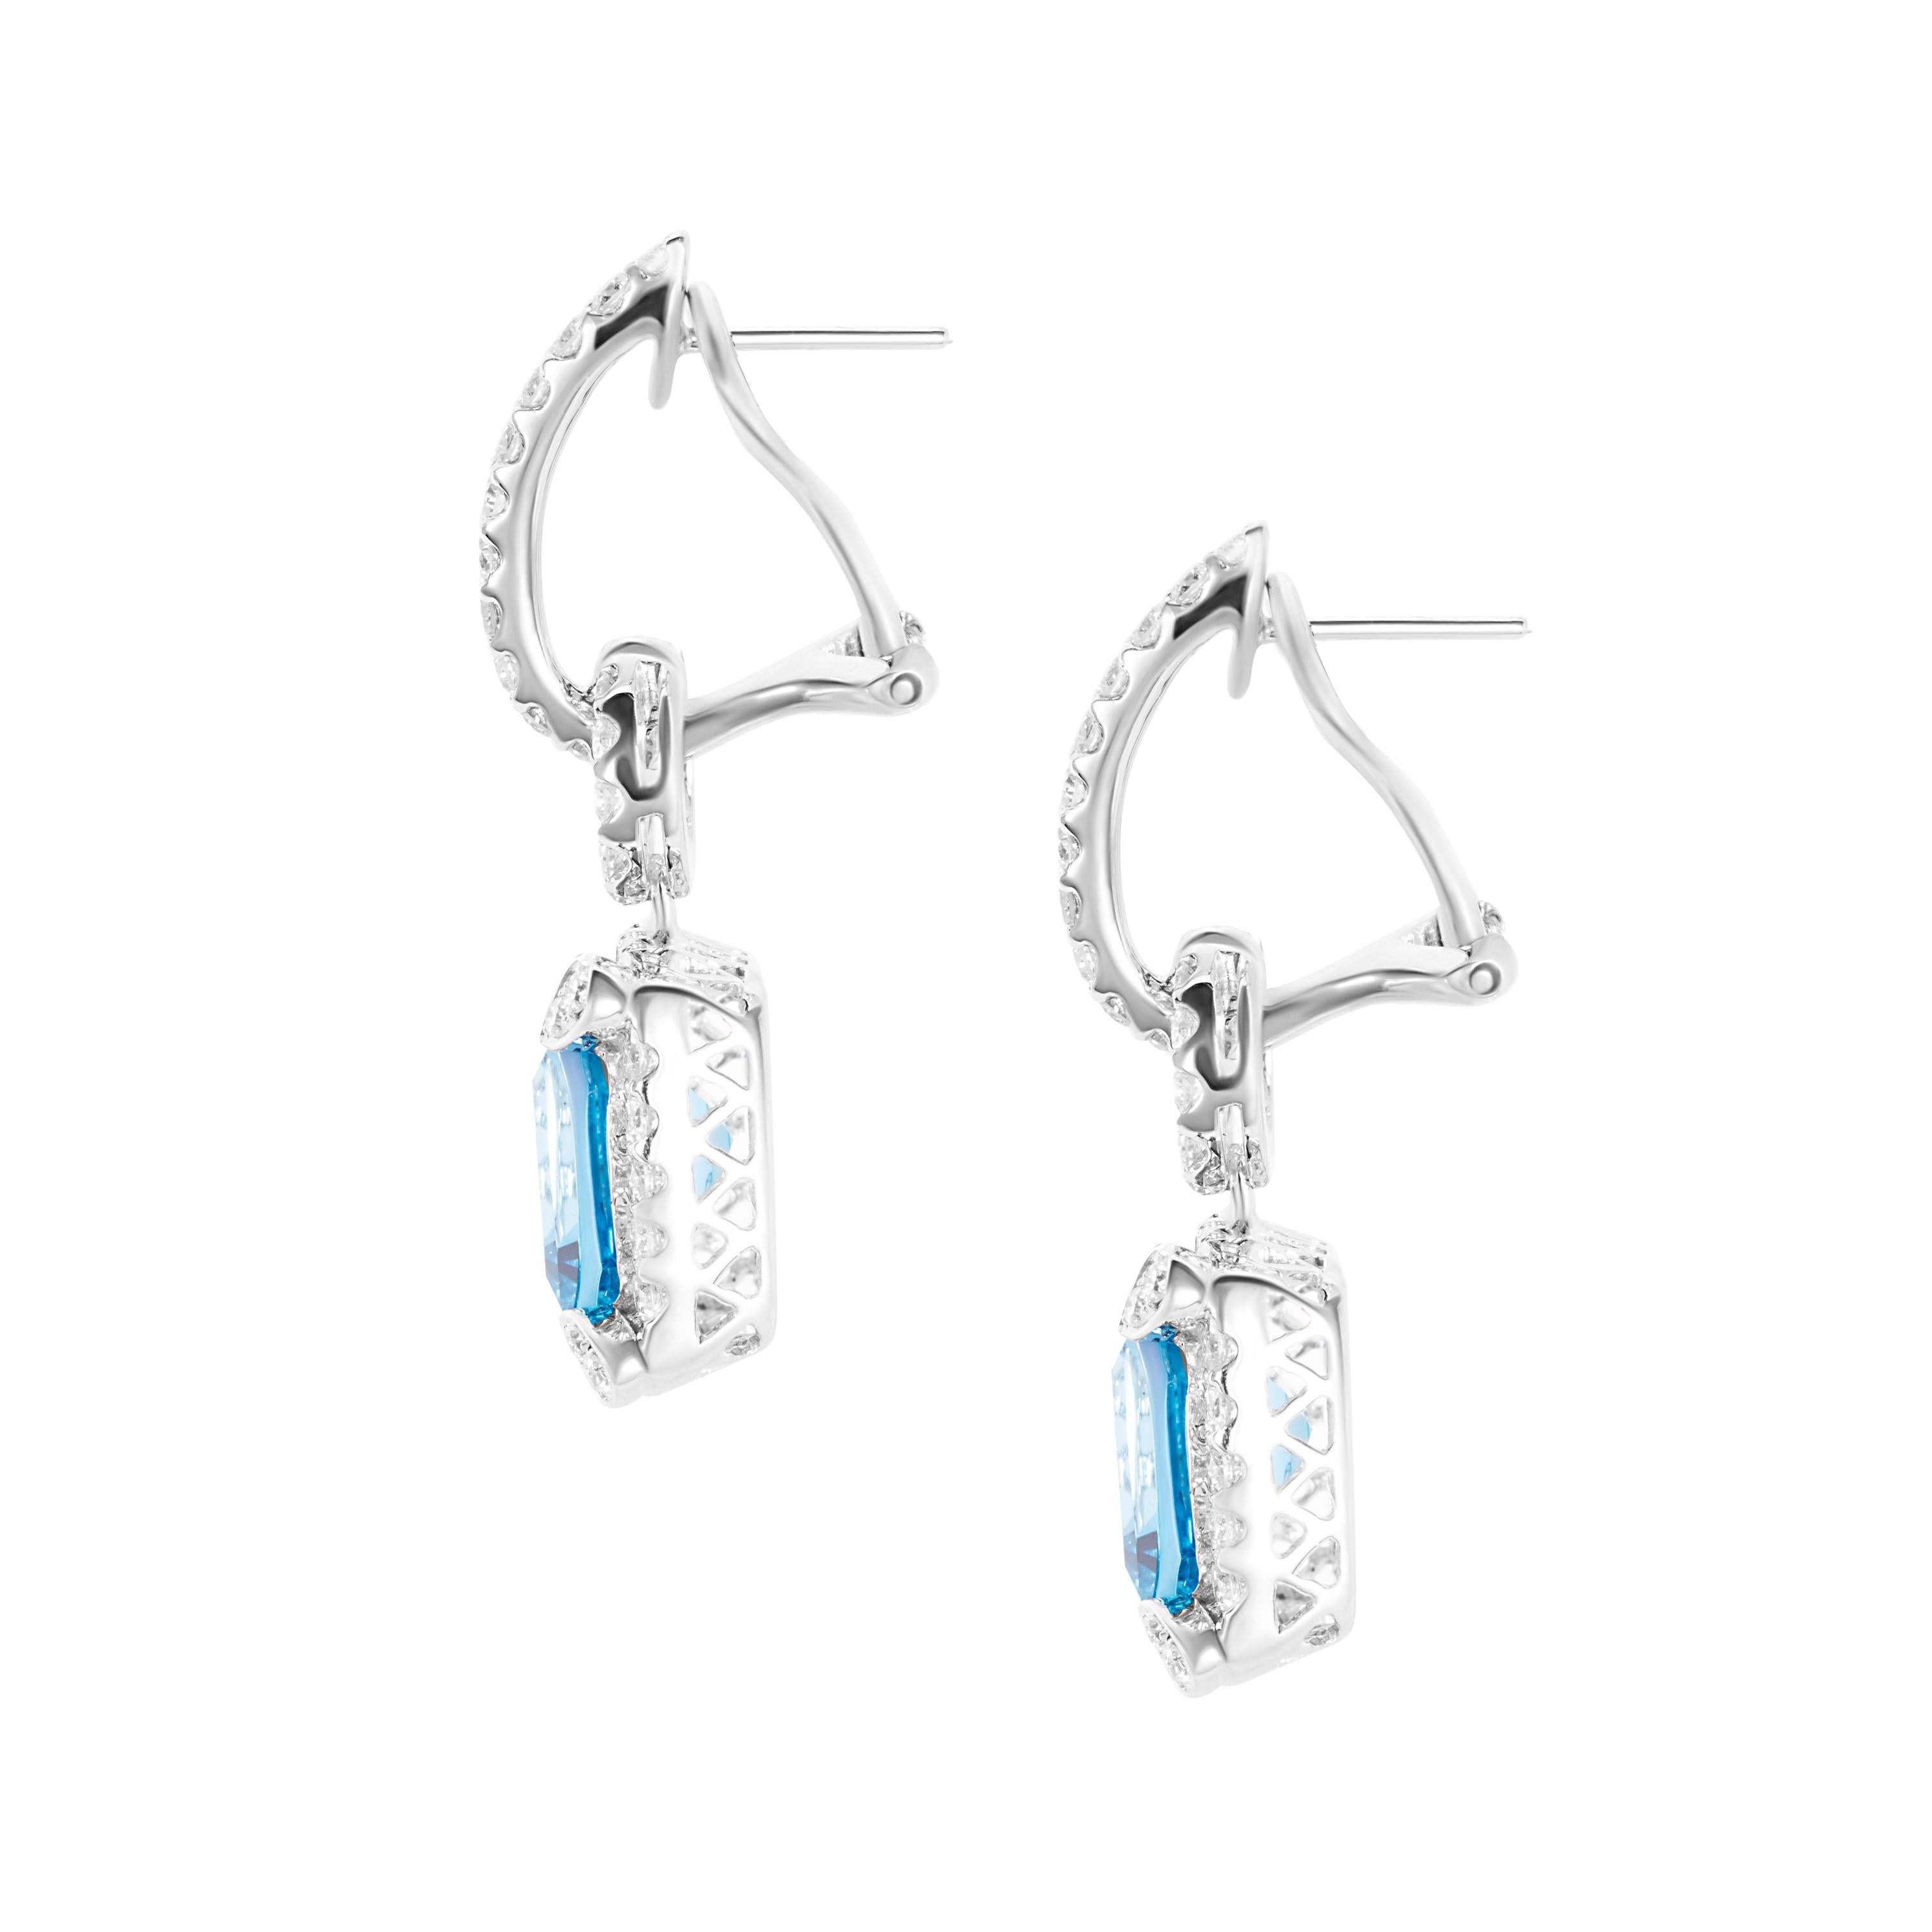 Set in 18K white gold for maximum shine, Butani's earrings feature a pair of square-shaped blue topaz with a combined carat weight of 10.57 carats, and 1.55 carats of brilliant round diamonds. A fabulous piece of jewellery for special occasions,